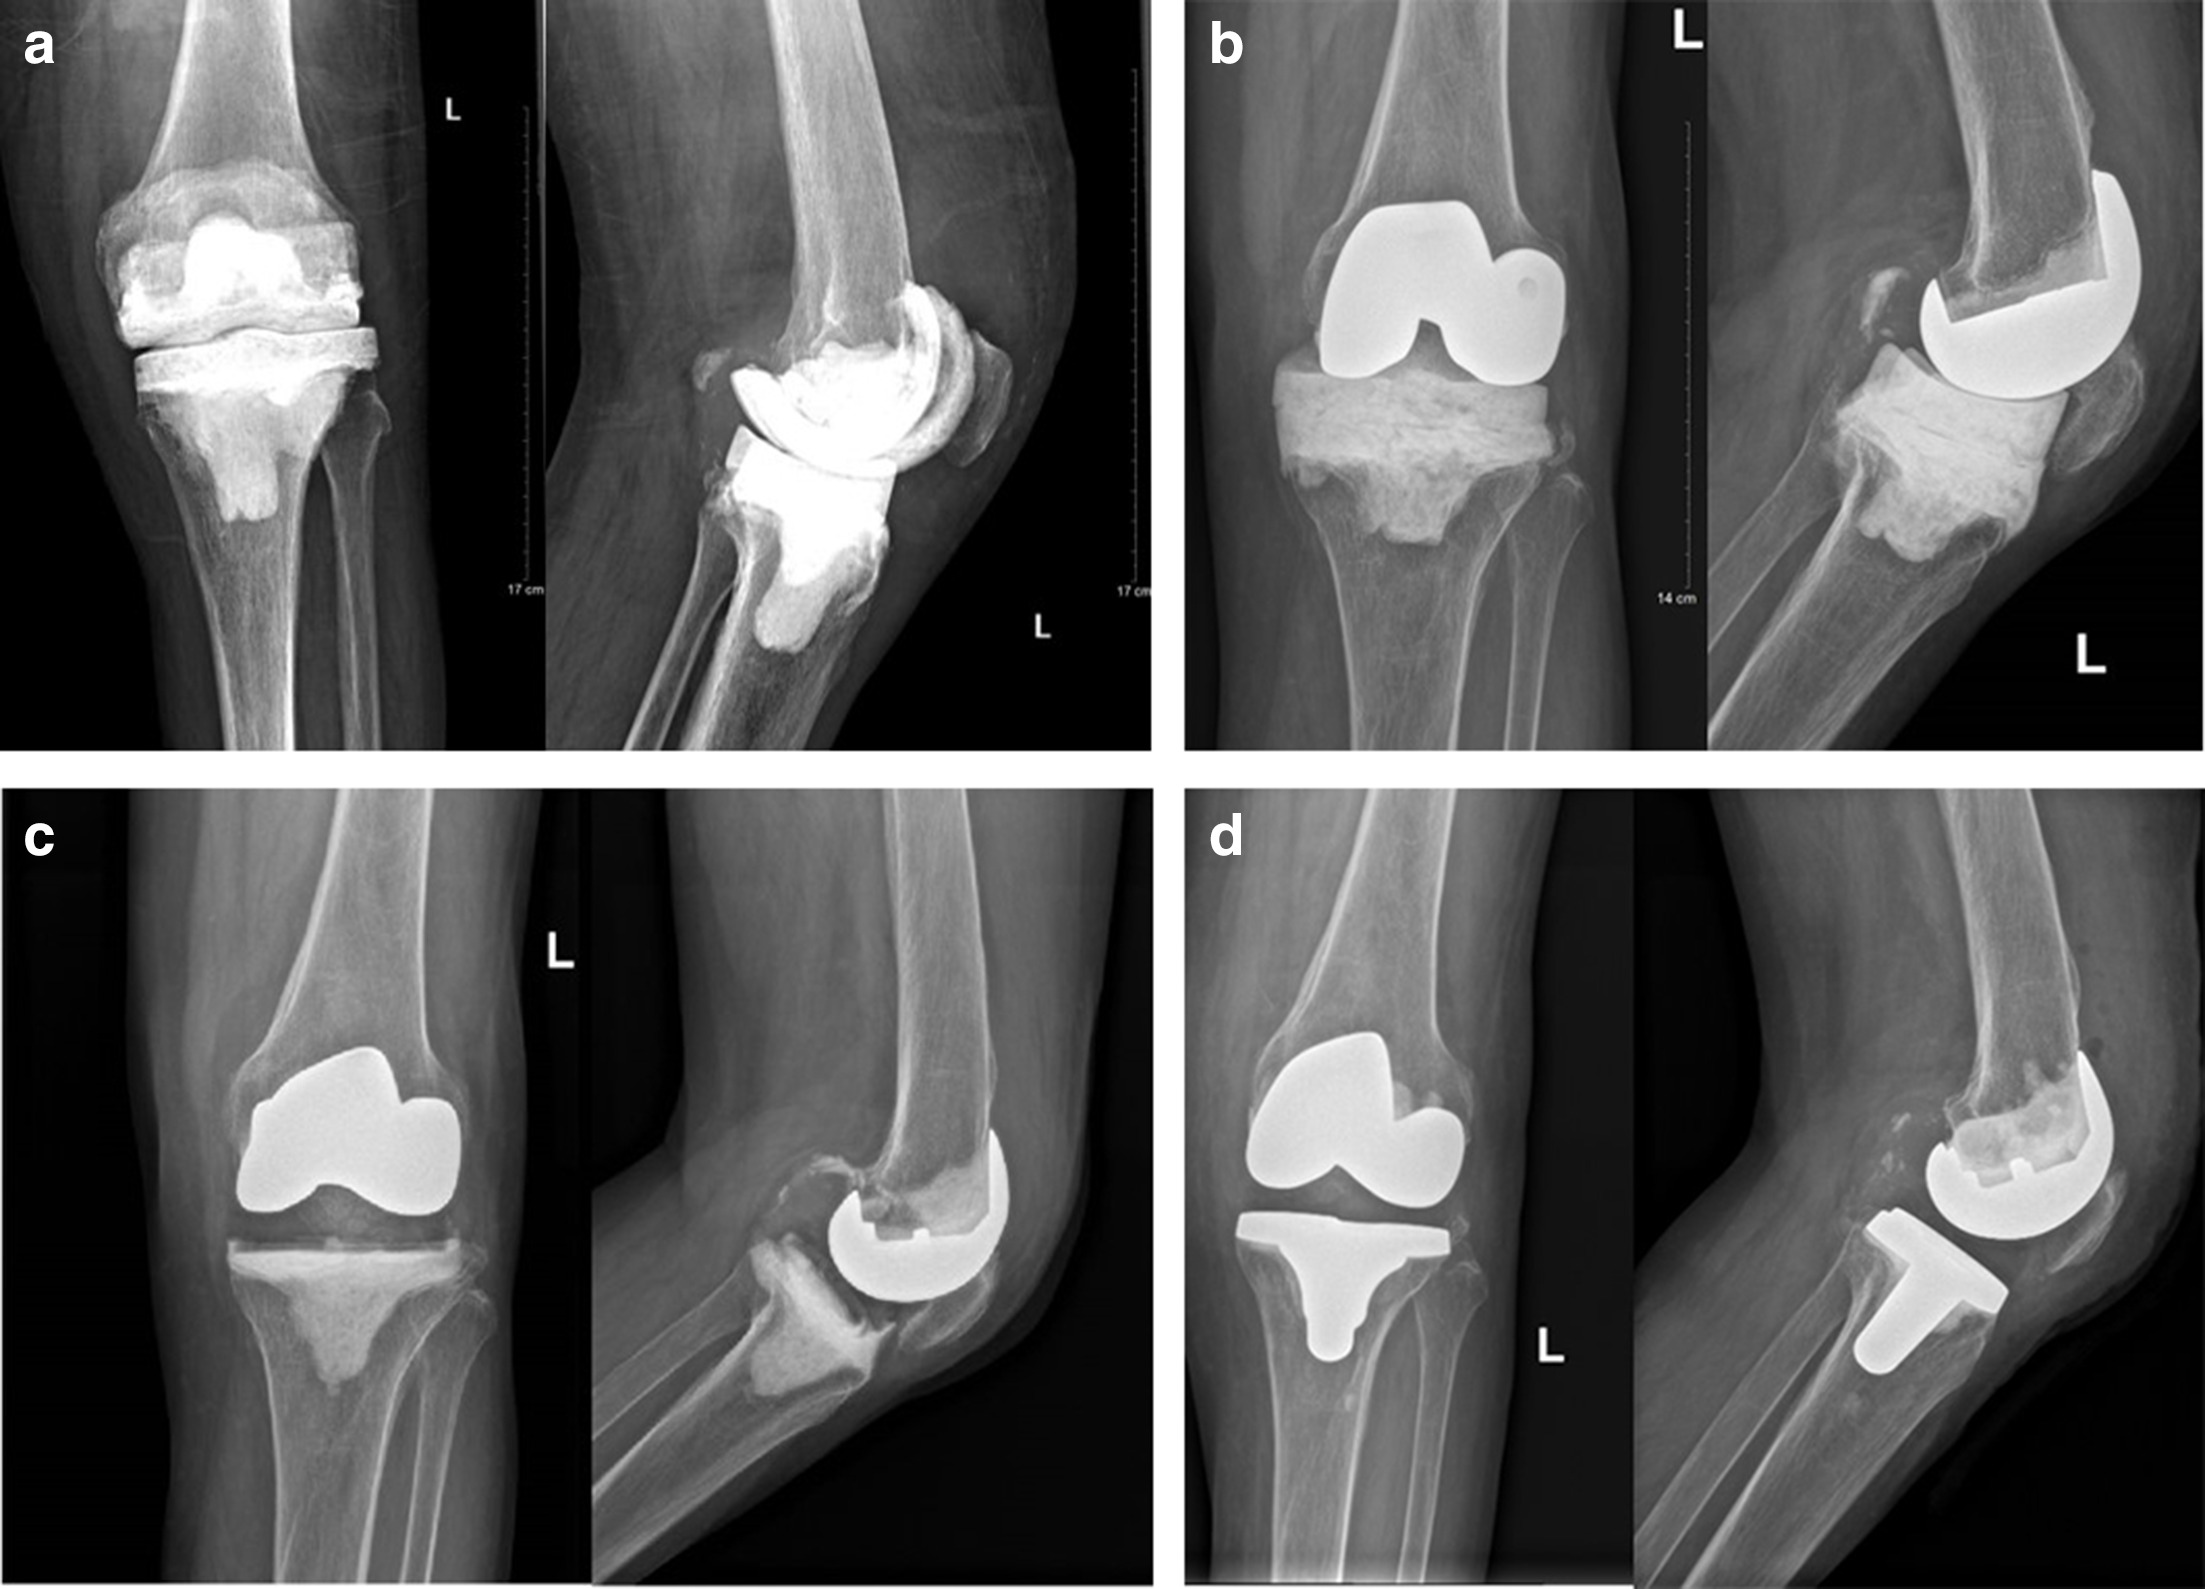 Fig. 1 
          Anteroposterior and lateral radiographs of different types of knee spacers. a) An 82-year-old male patient with a cement spacer one week after revision. b) A 72-year-old female patient with a metal-cement spacer one week after revision. c) A 62-year-old male patient with a metal-polyethylene spacer one week after revision. d) A 72-year-old male patient with primary arthroplasty implants as a spacer one week after revision.
        